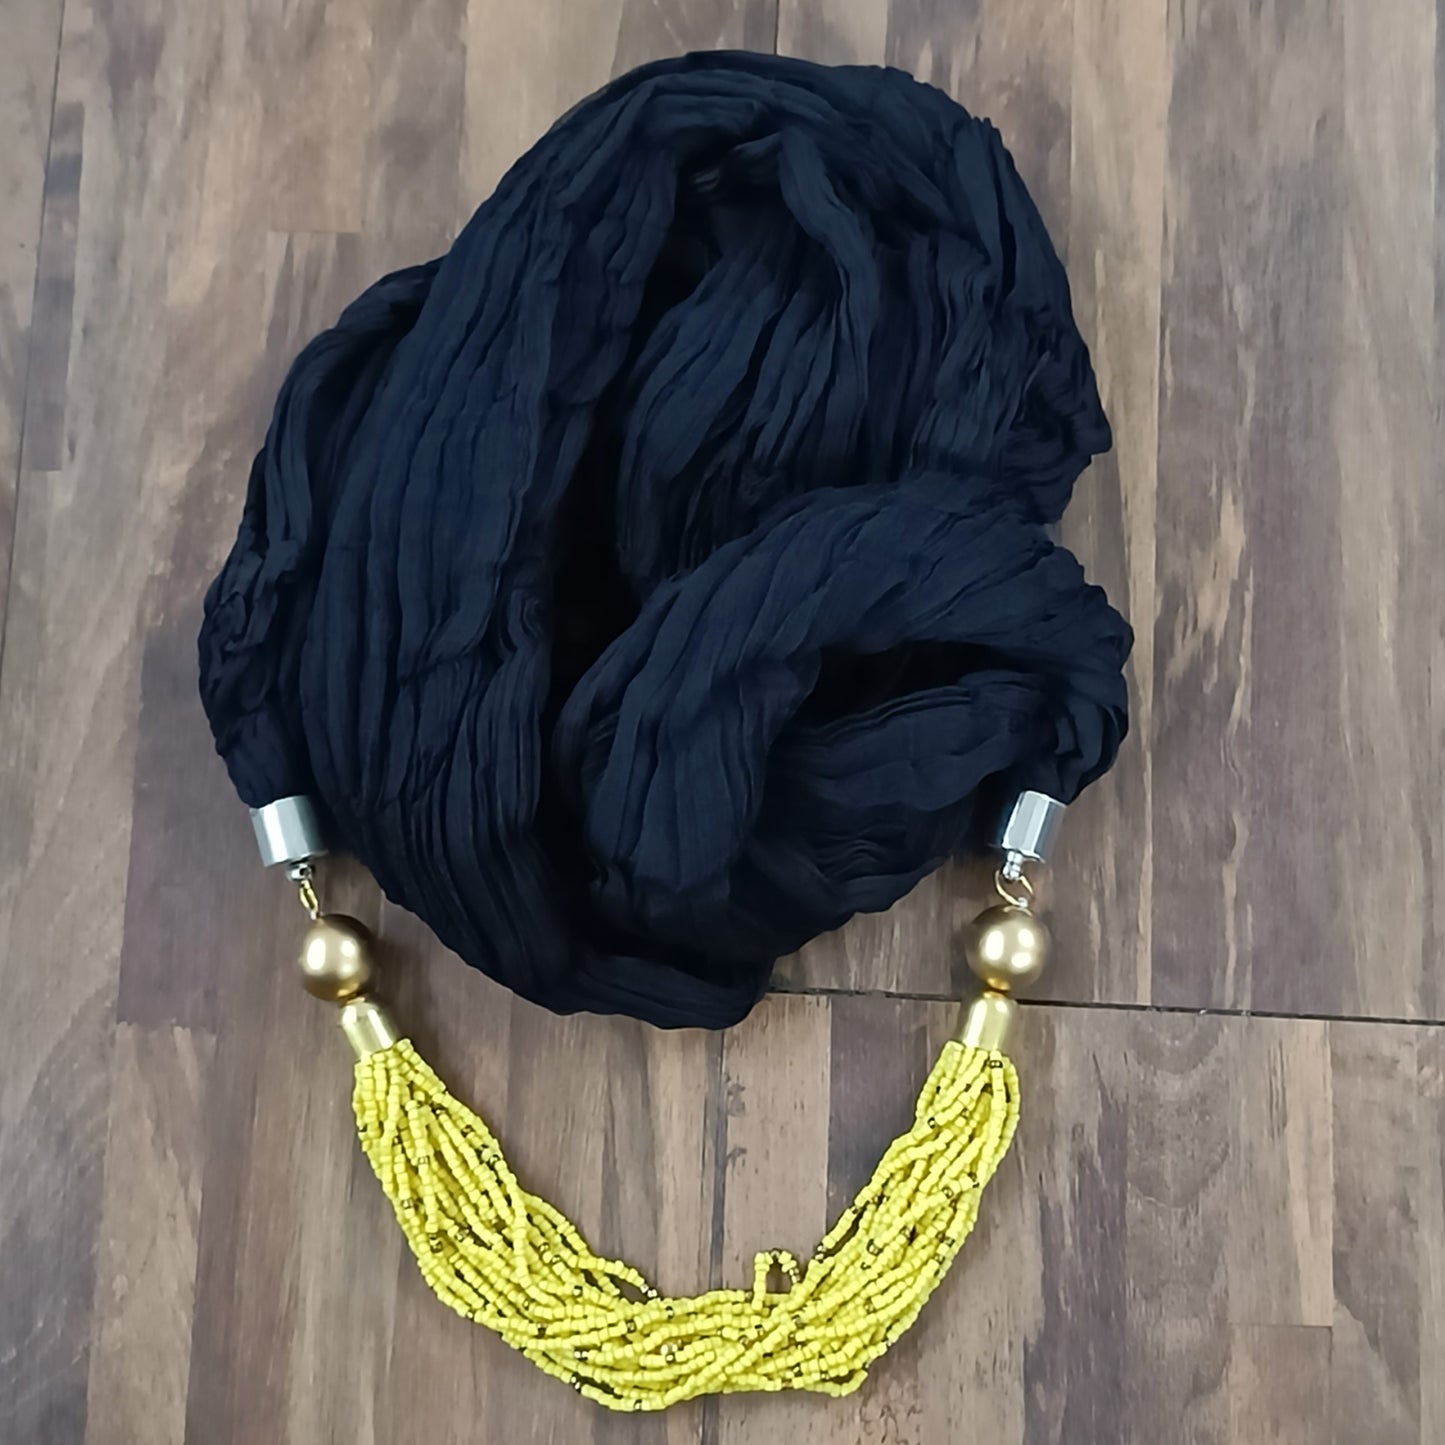 Bdiva Handmade Black Scarf With Yellow Colored Seed Beads Necklace.